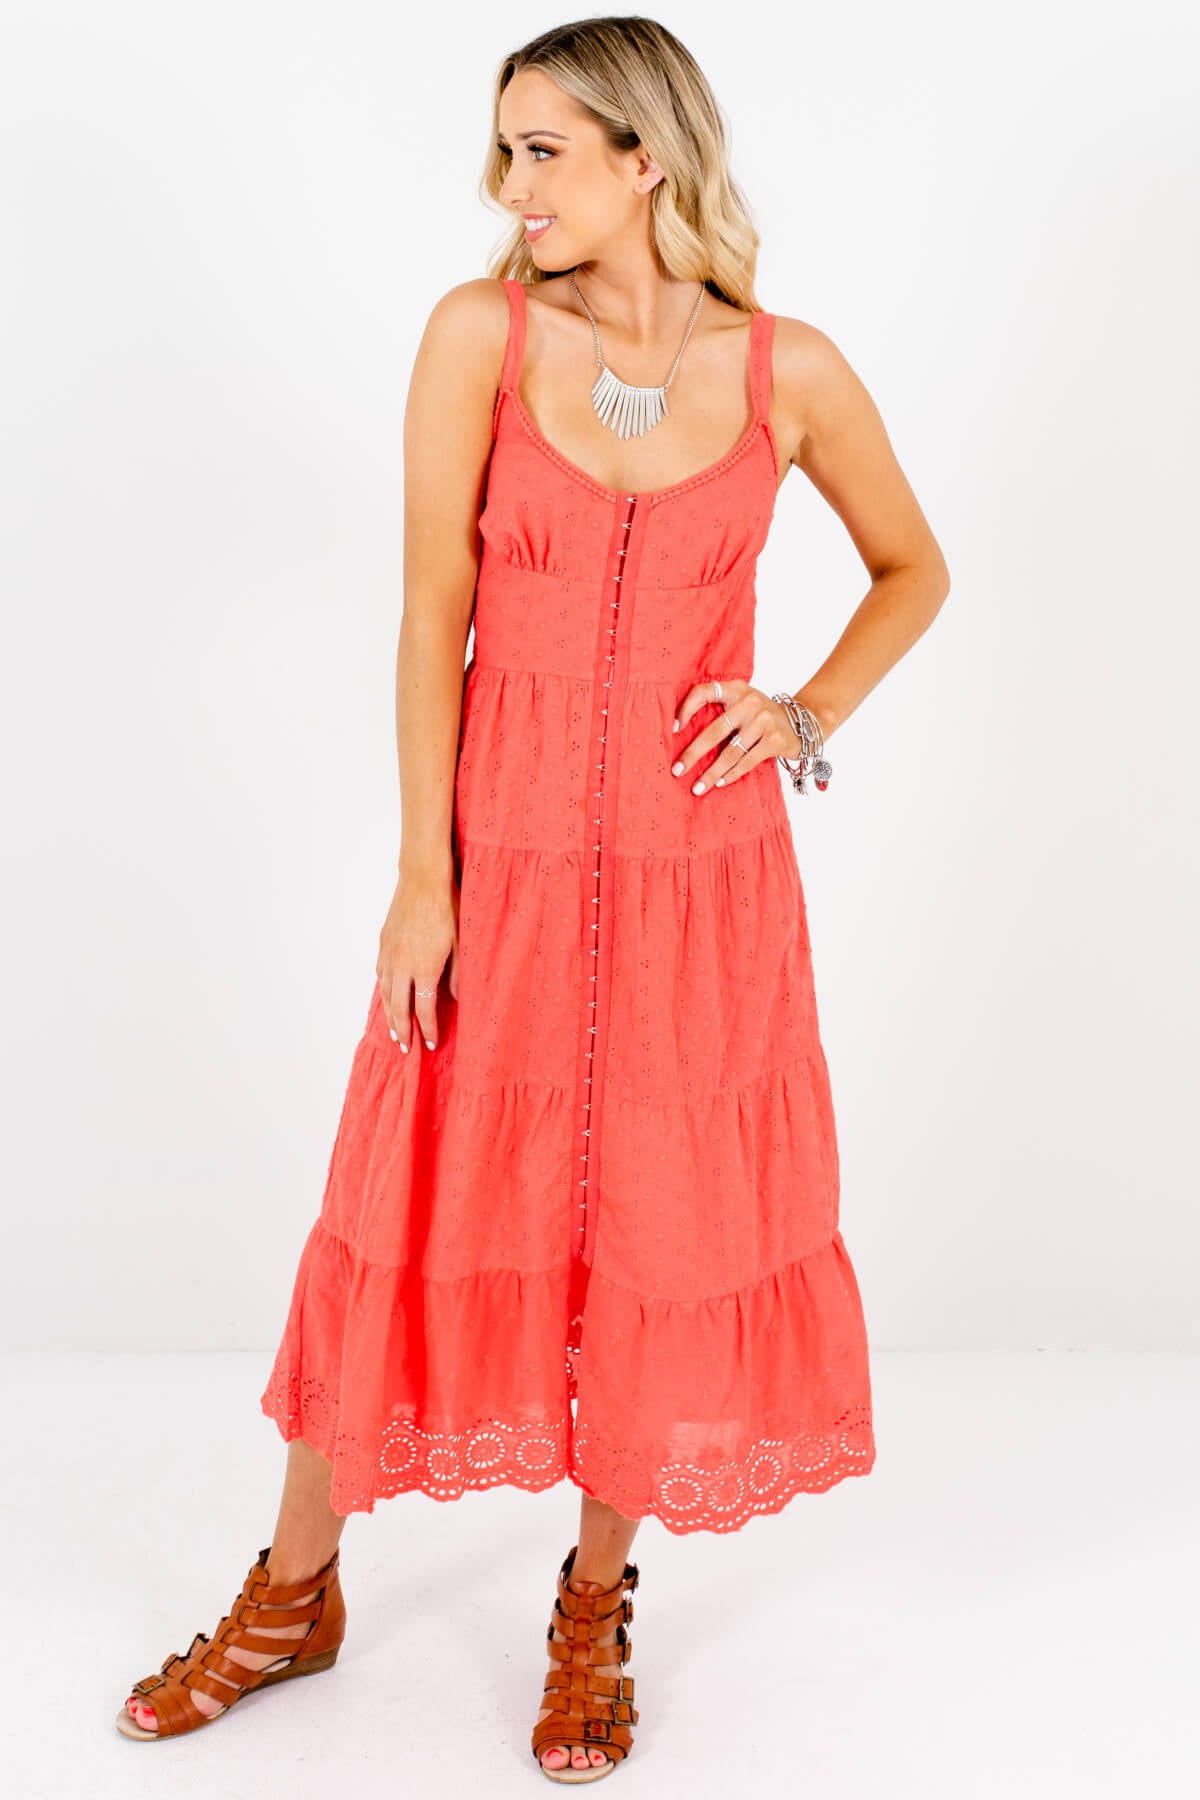 Coral Eyelet Embroidered Crochet Midi Dresses with Hook-and-Eye Front Closure